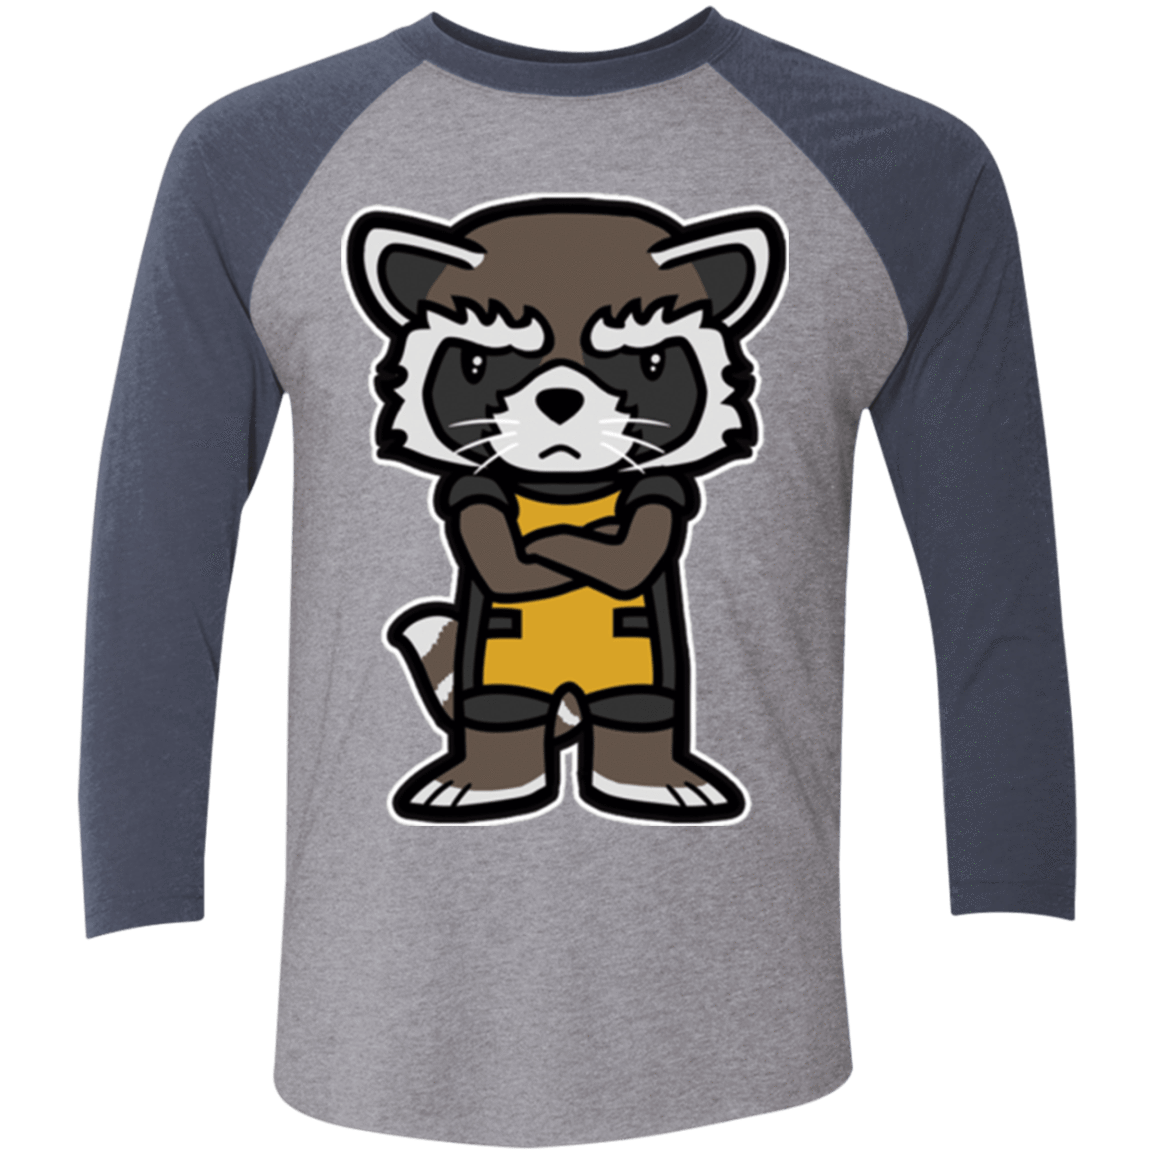 T-Shirts Premium Heather/ Vintage Navy / X-Small Angry Racoon Triblend 3/4 Sleeve